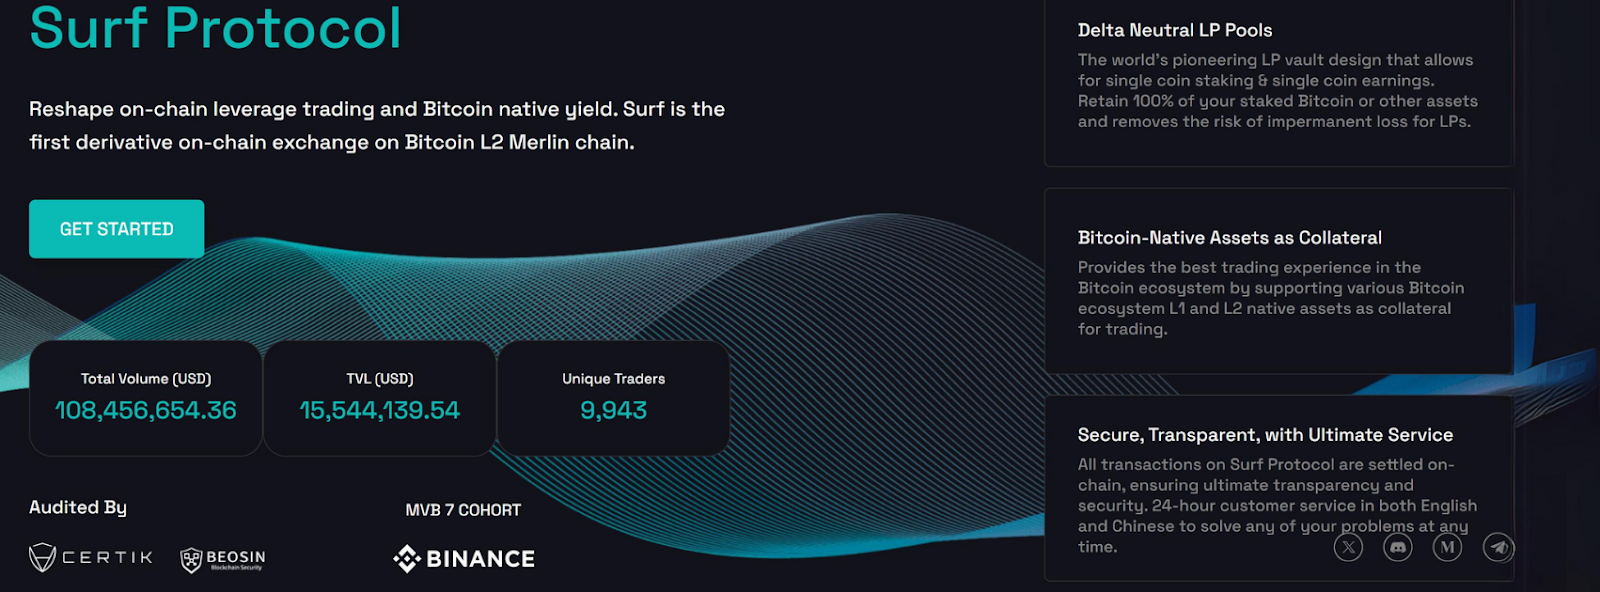 Surf Protocol Announces Innovative Features and Community Rewards in Pursuit of Decentralized Trading Revolution.